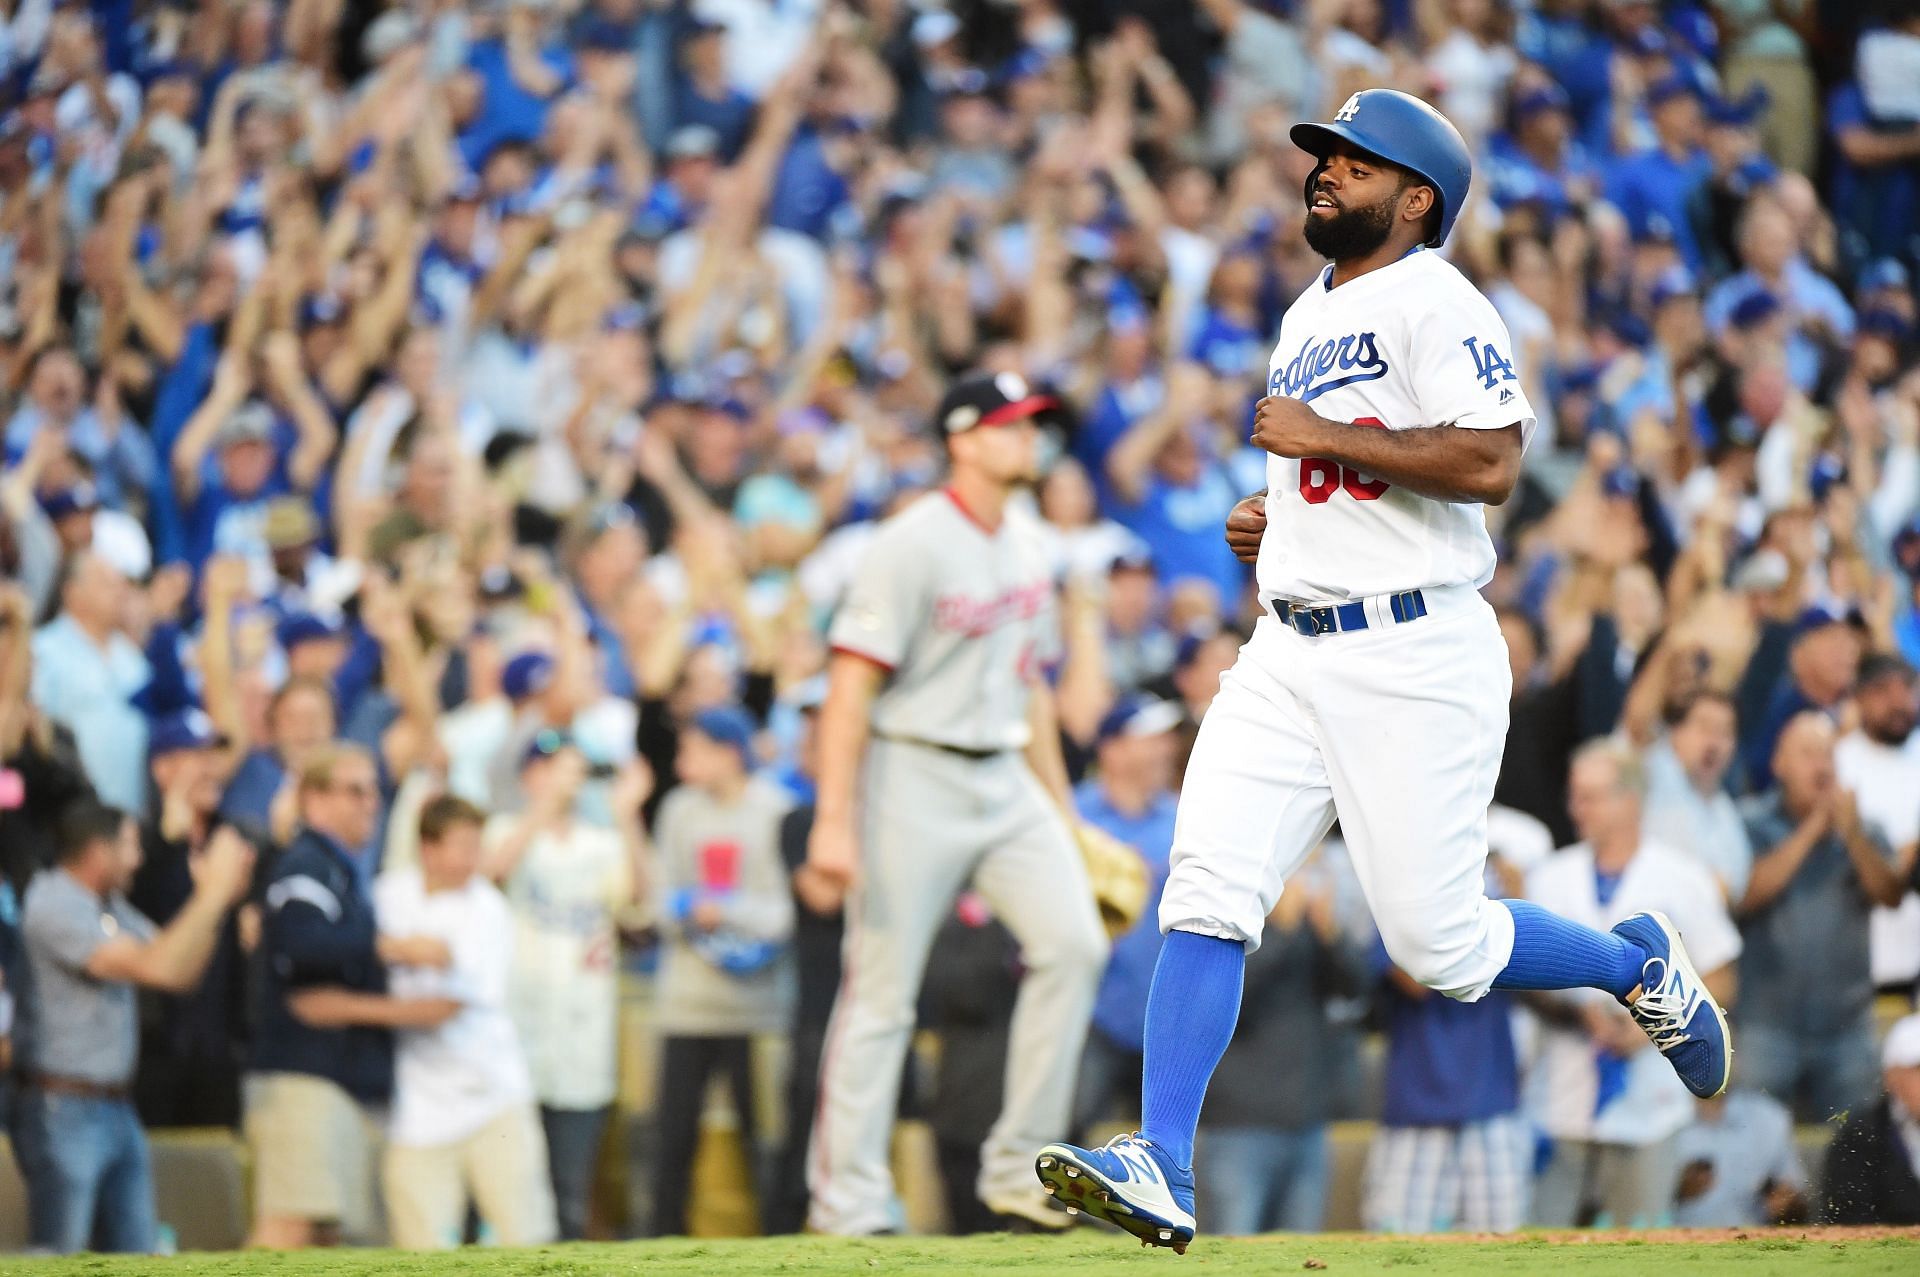 Alvin Toles Speaks Out On Andrew Toles: I Want Him To Have A Chance At Life